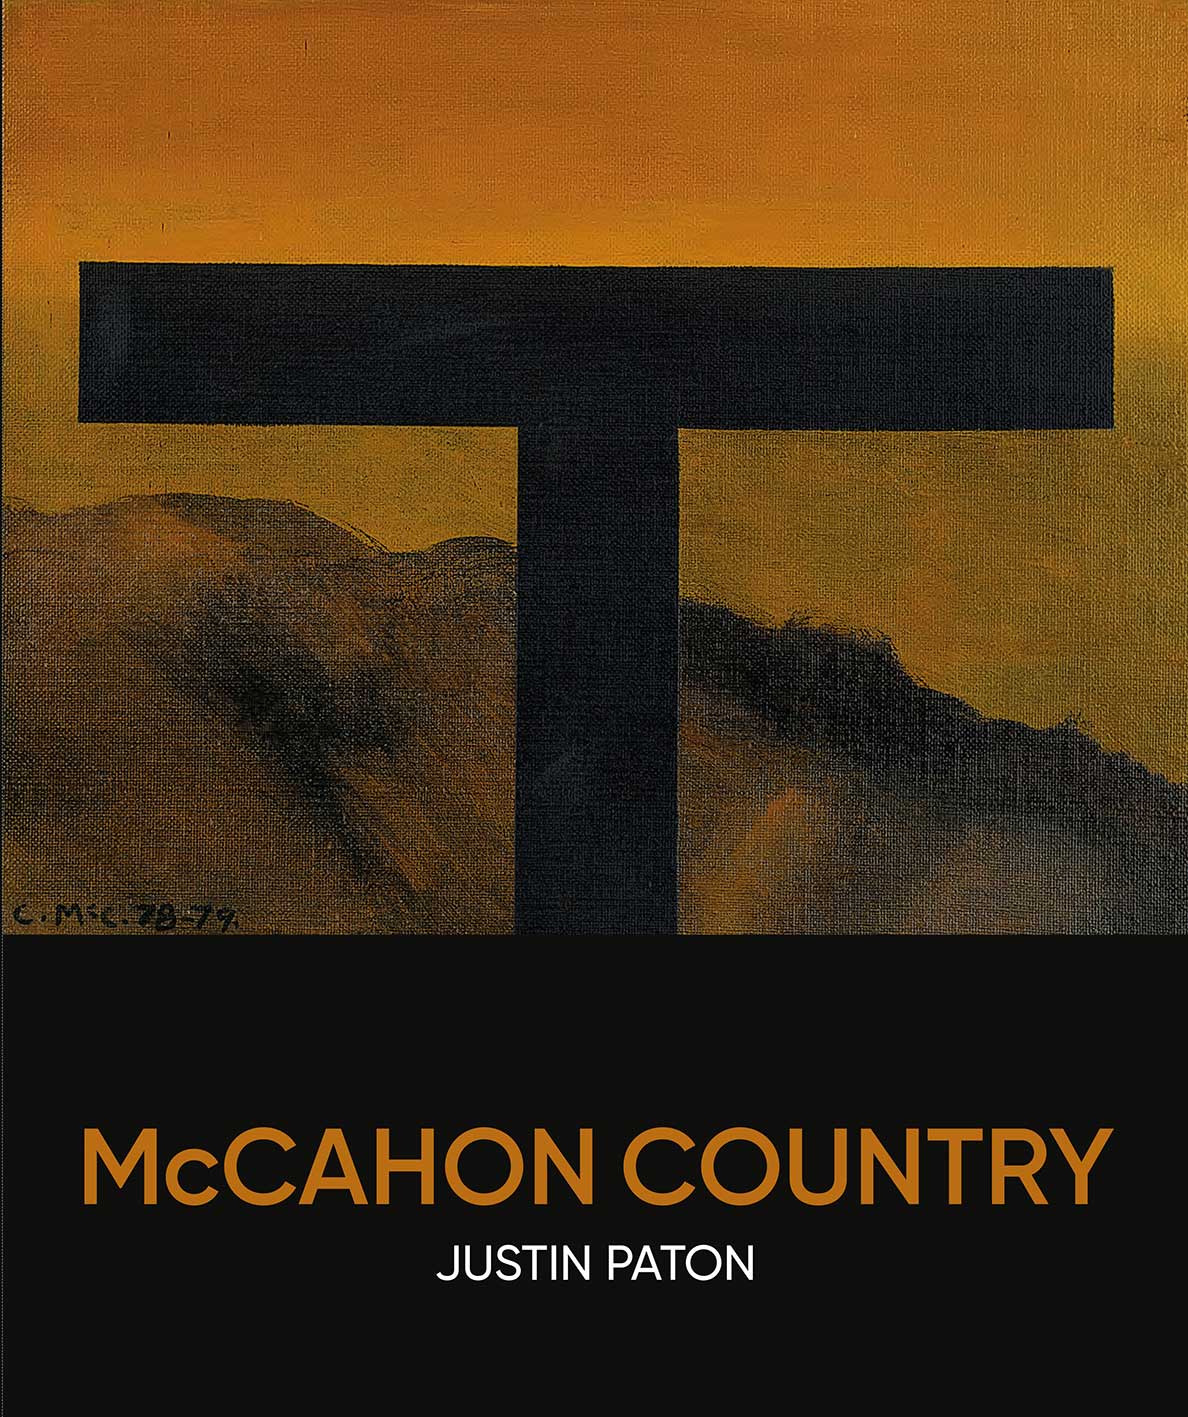  Illustrated talk: McCahon Country by Justin Paton